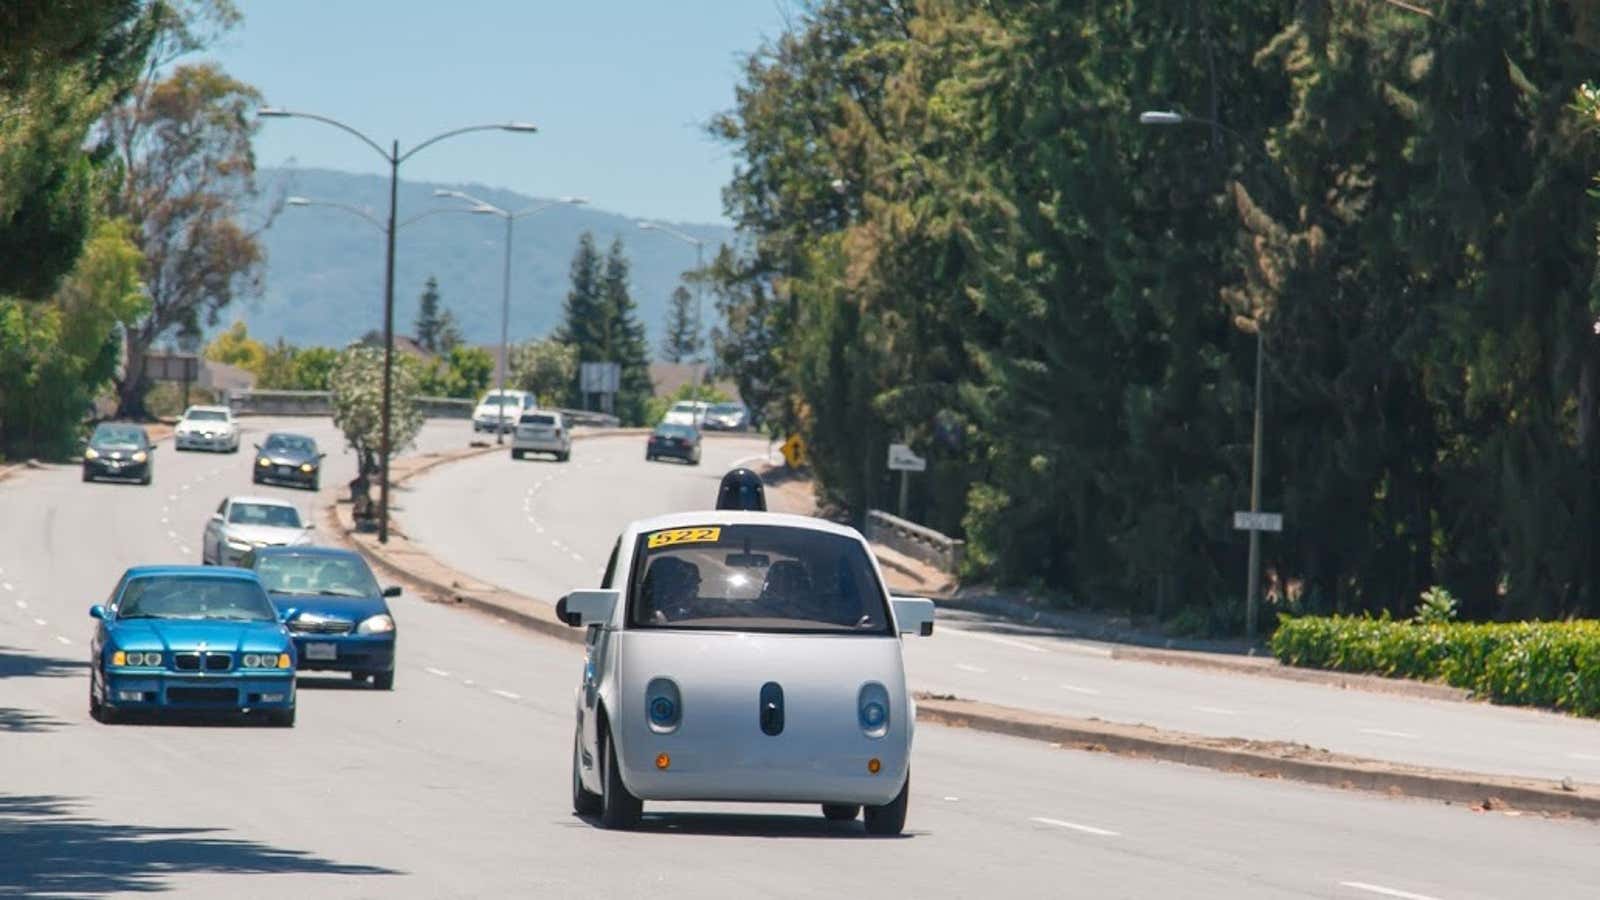 There’s a Toyota right behind that Google self-driving car.